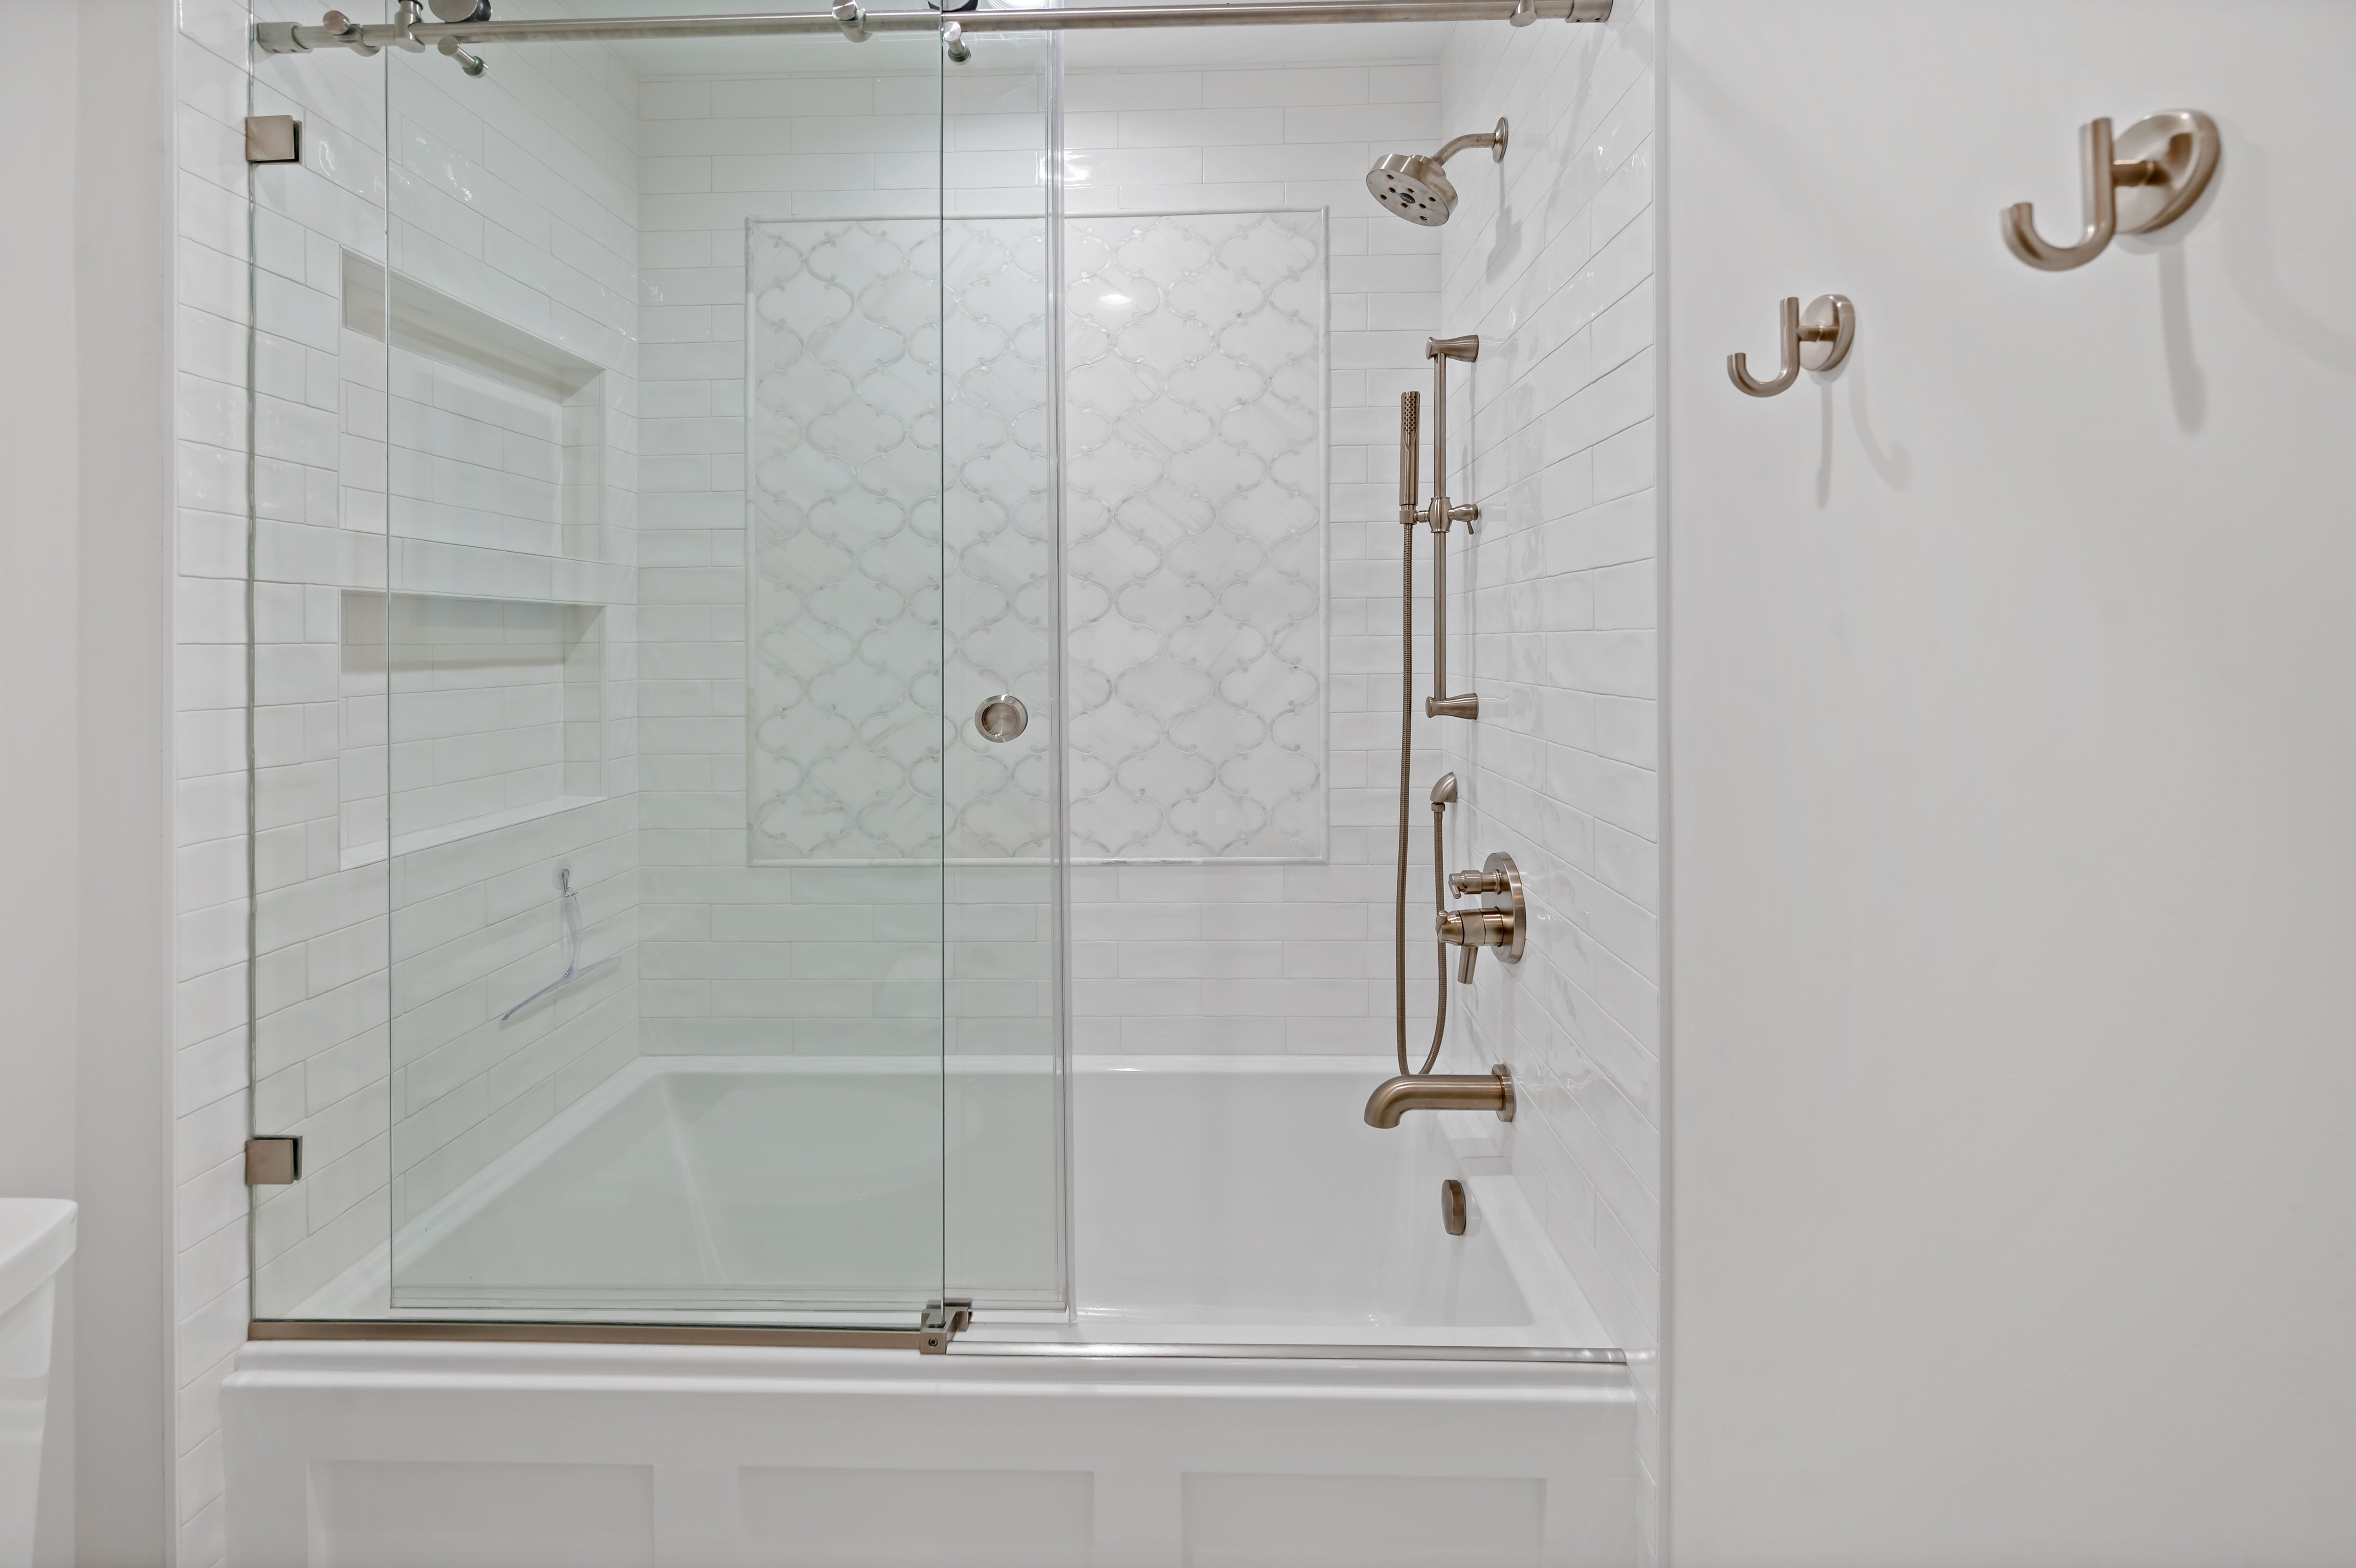 Bathtub shower combo with gold fixtures